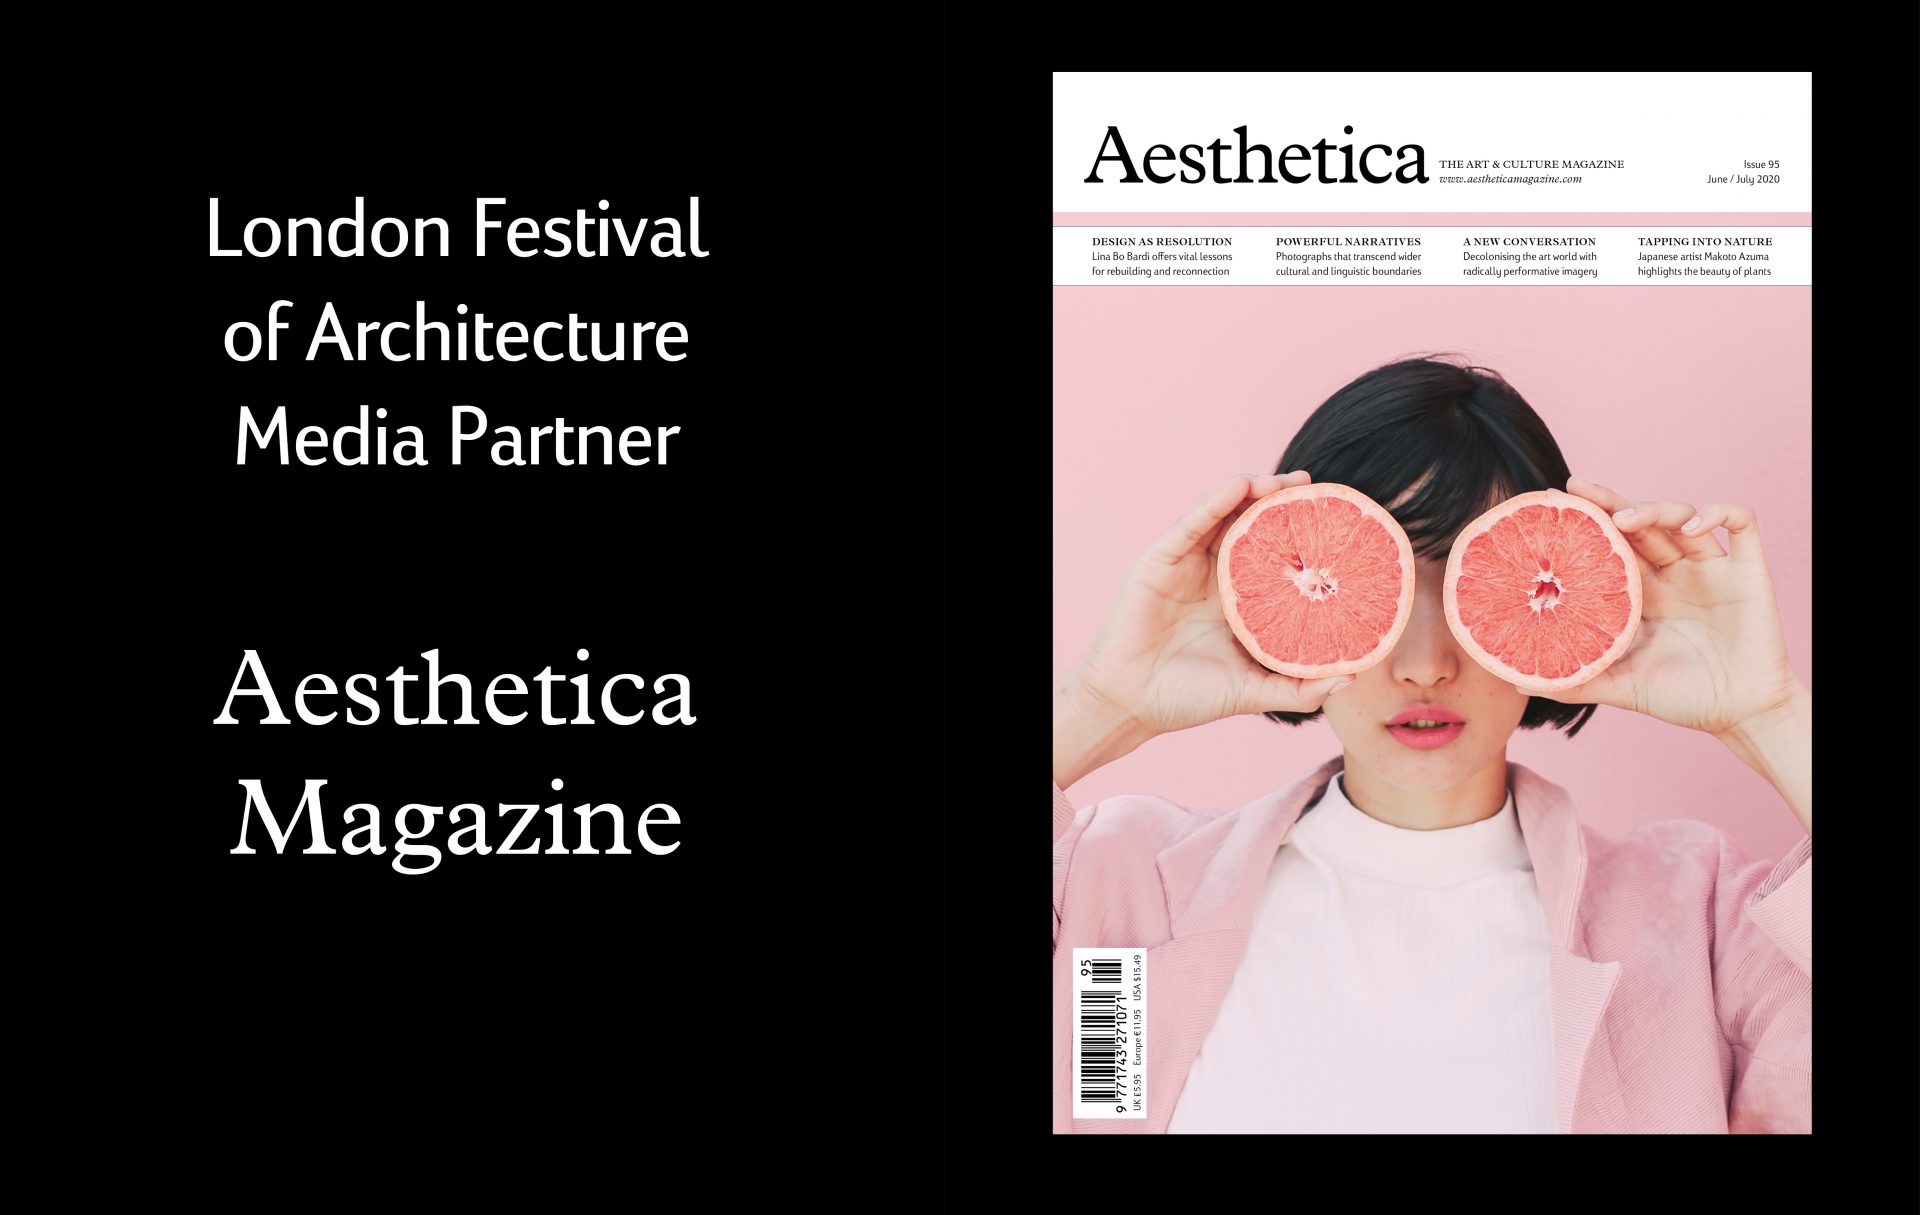 Discover the latest from the world of architecture & design with Aesthetica